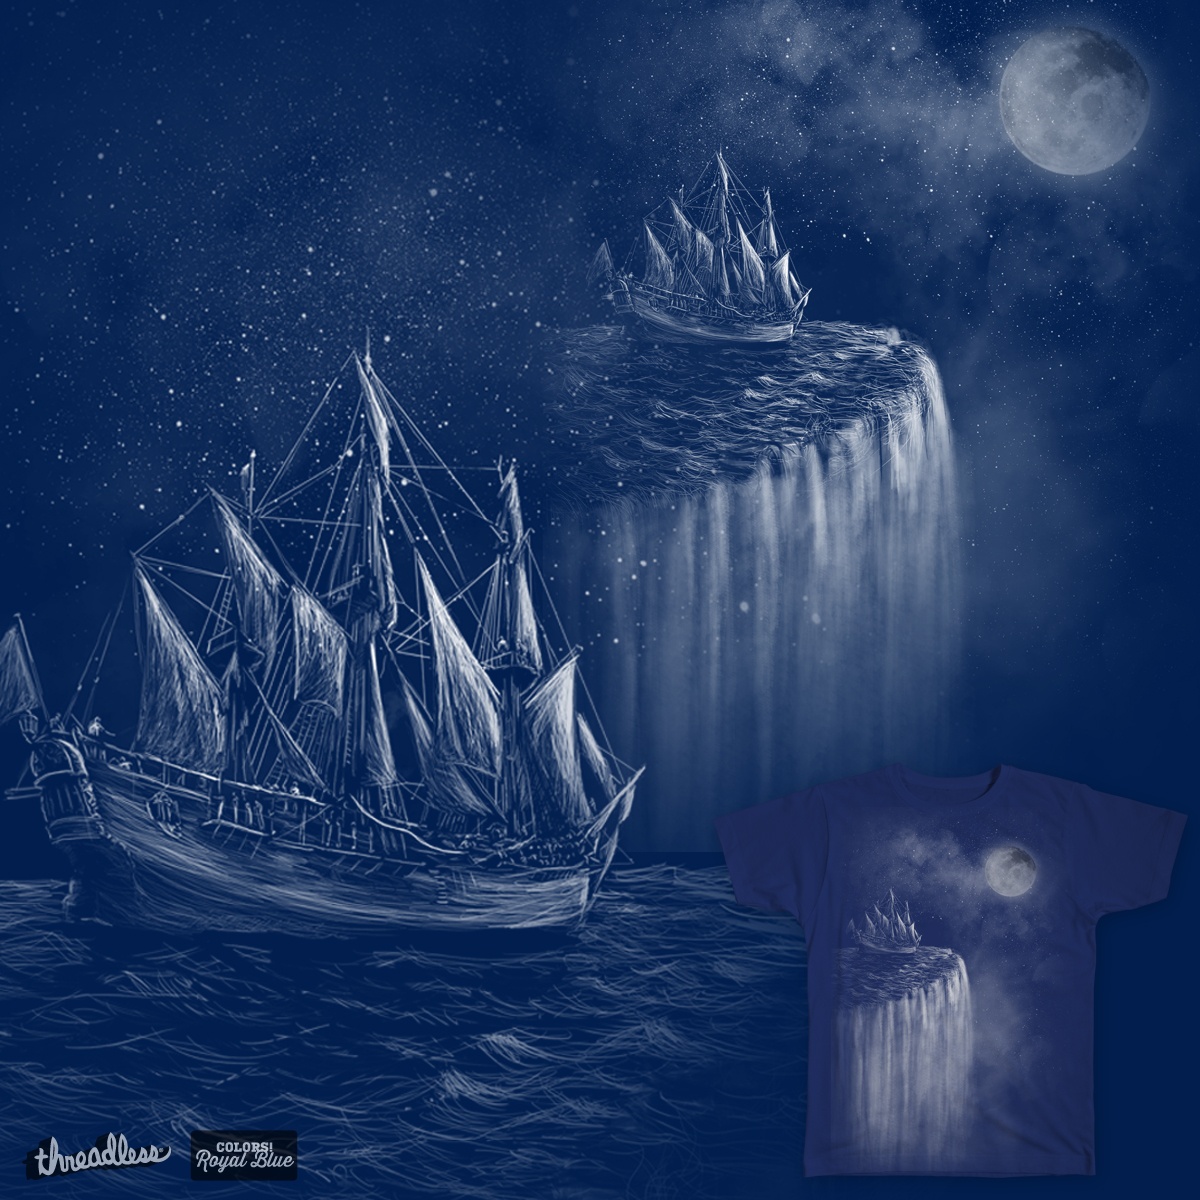 At the Edge of the World, a cool t-shirt design